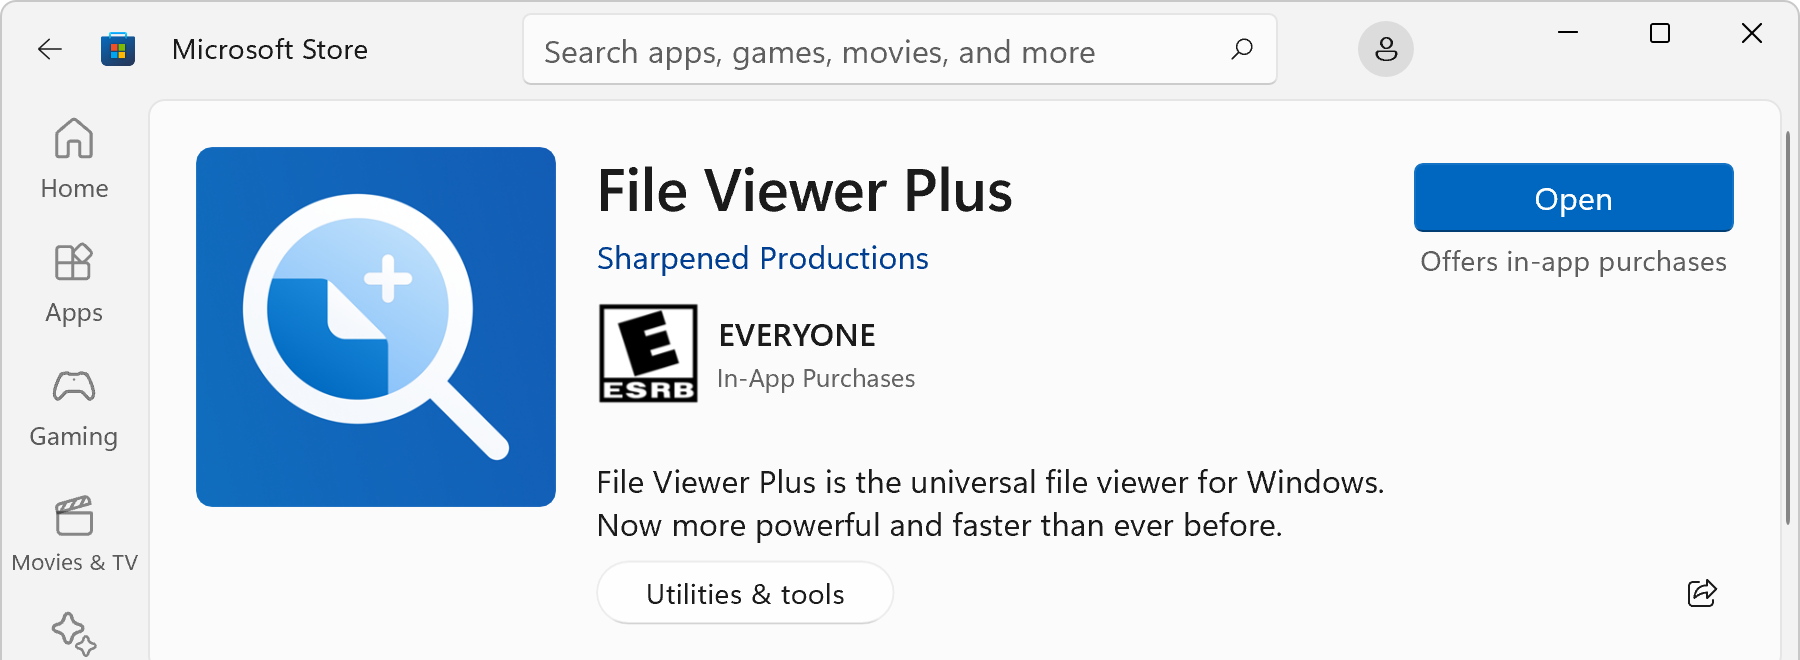 File Viewer Plus on the Microsoft Store